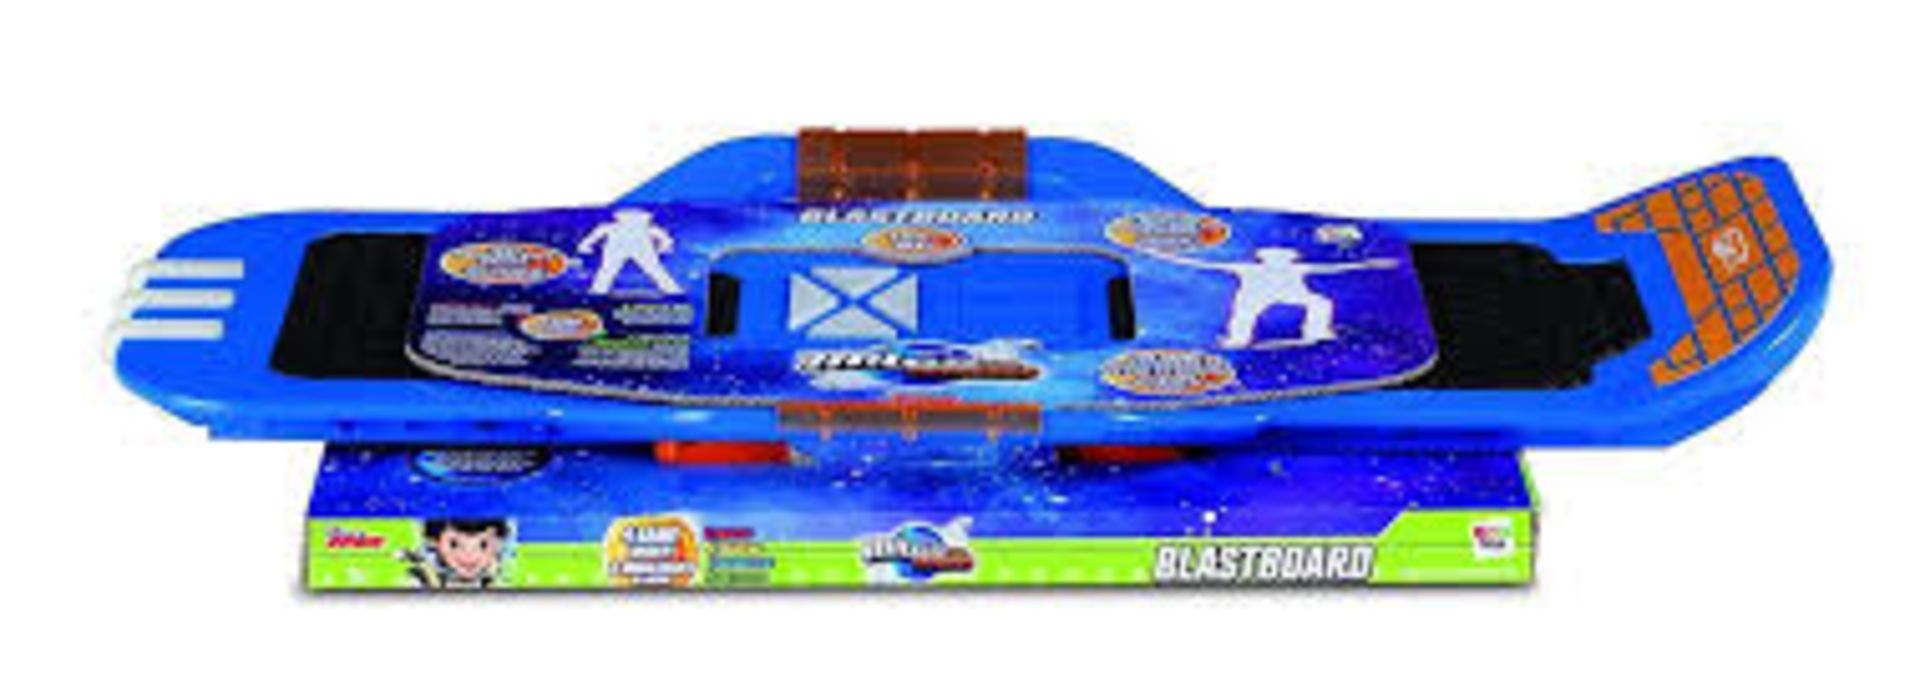 72 x Miles from Tomorrow 481169 Blastboard Toy | 8421134481169 | RRP £ 447.12